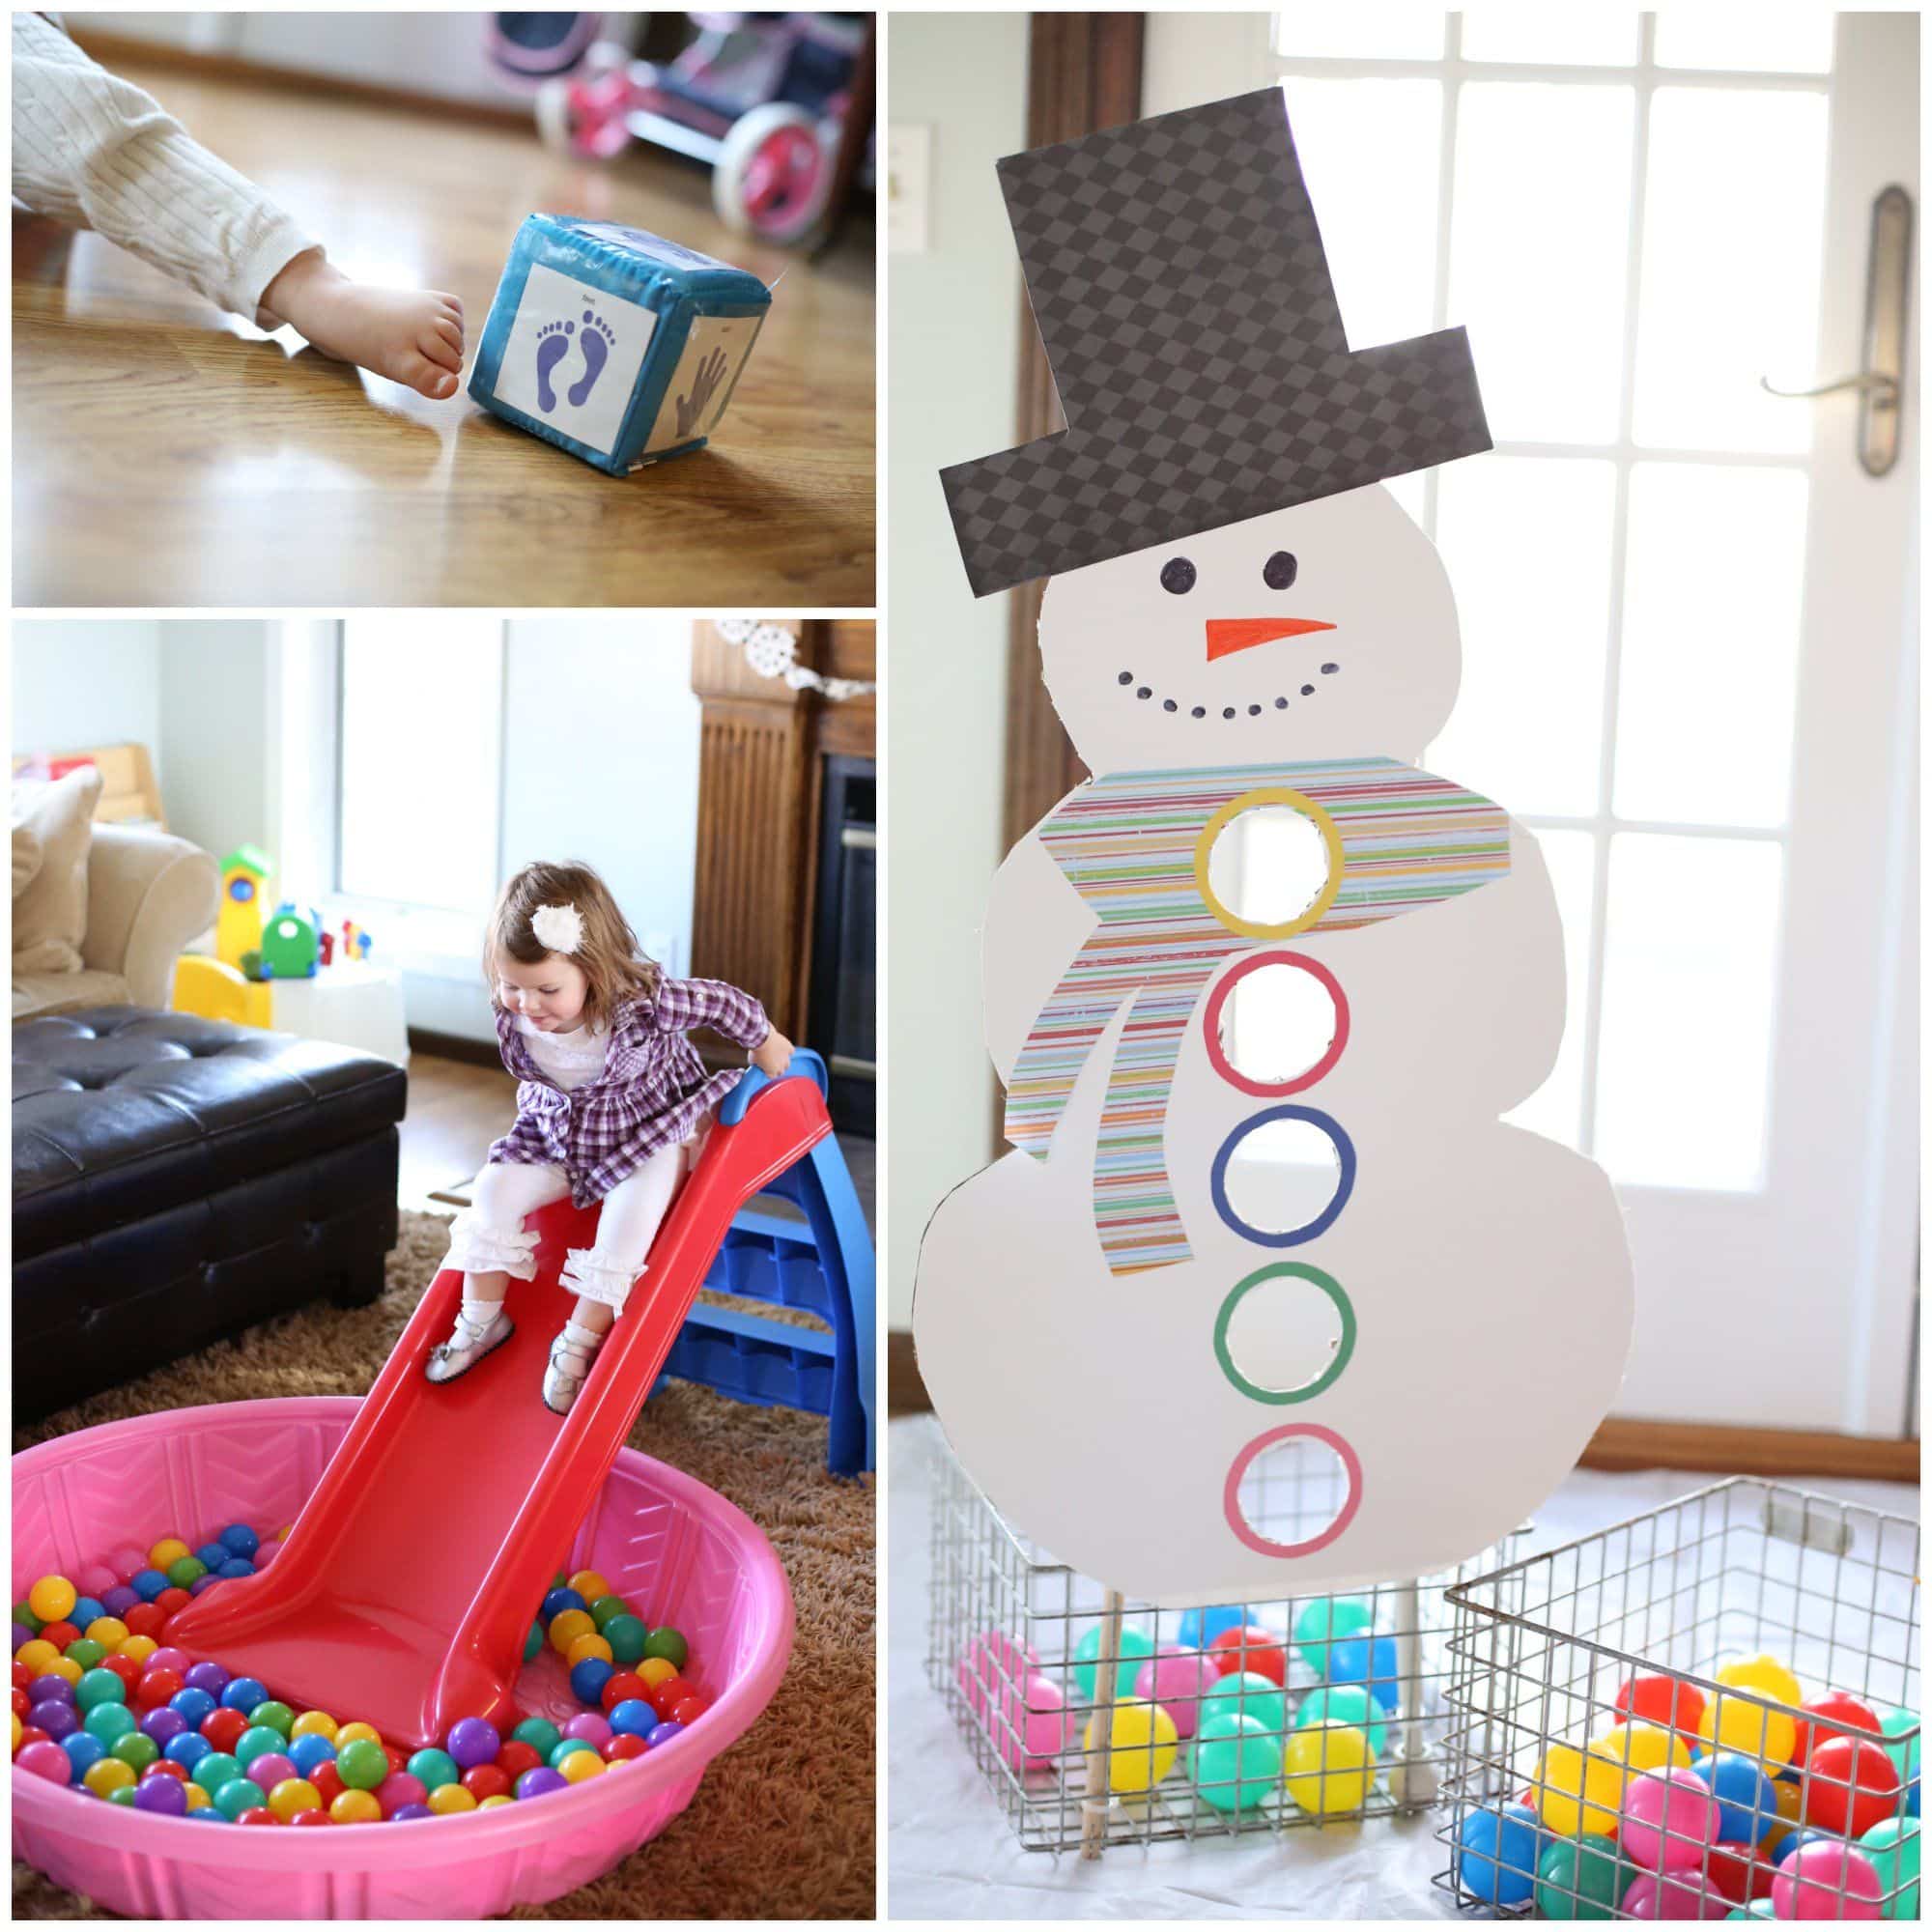 31 Days of Indoor Activities for Toddlers